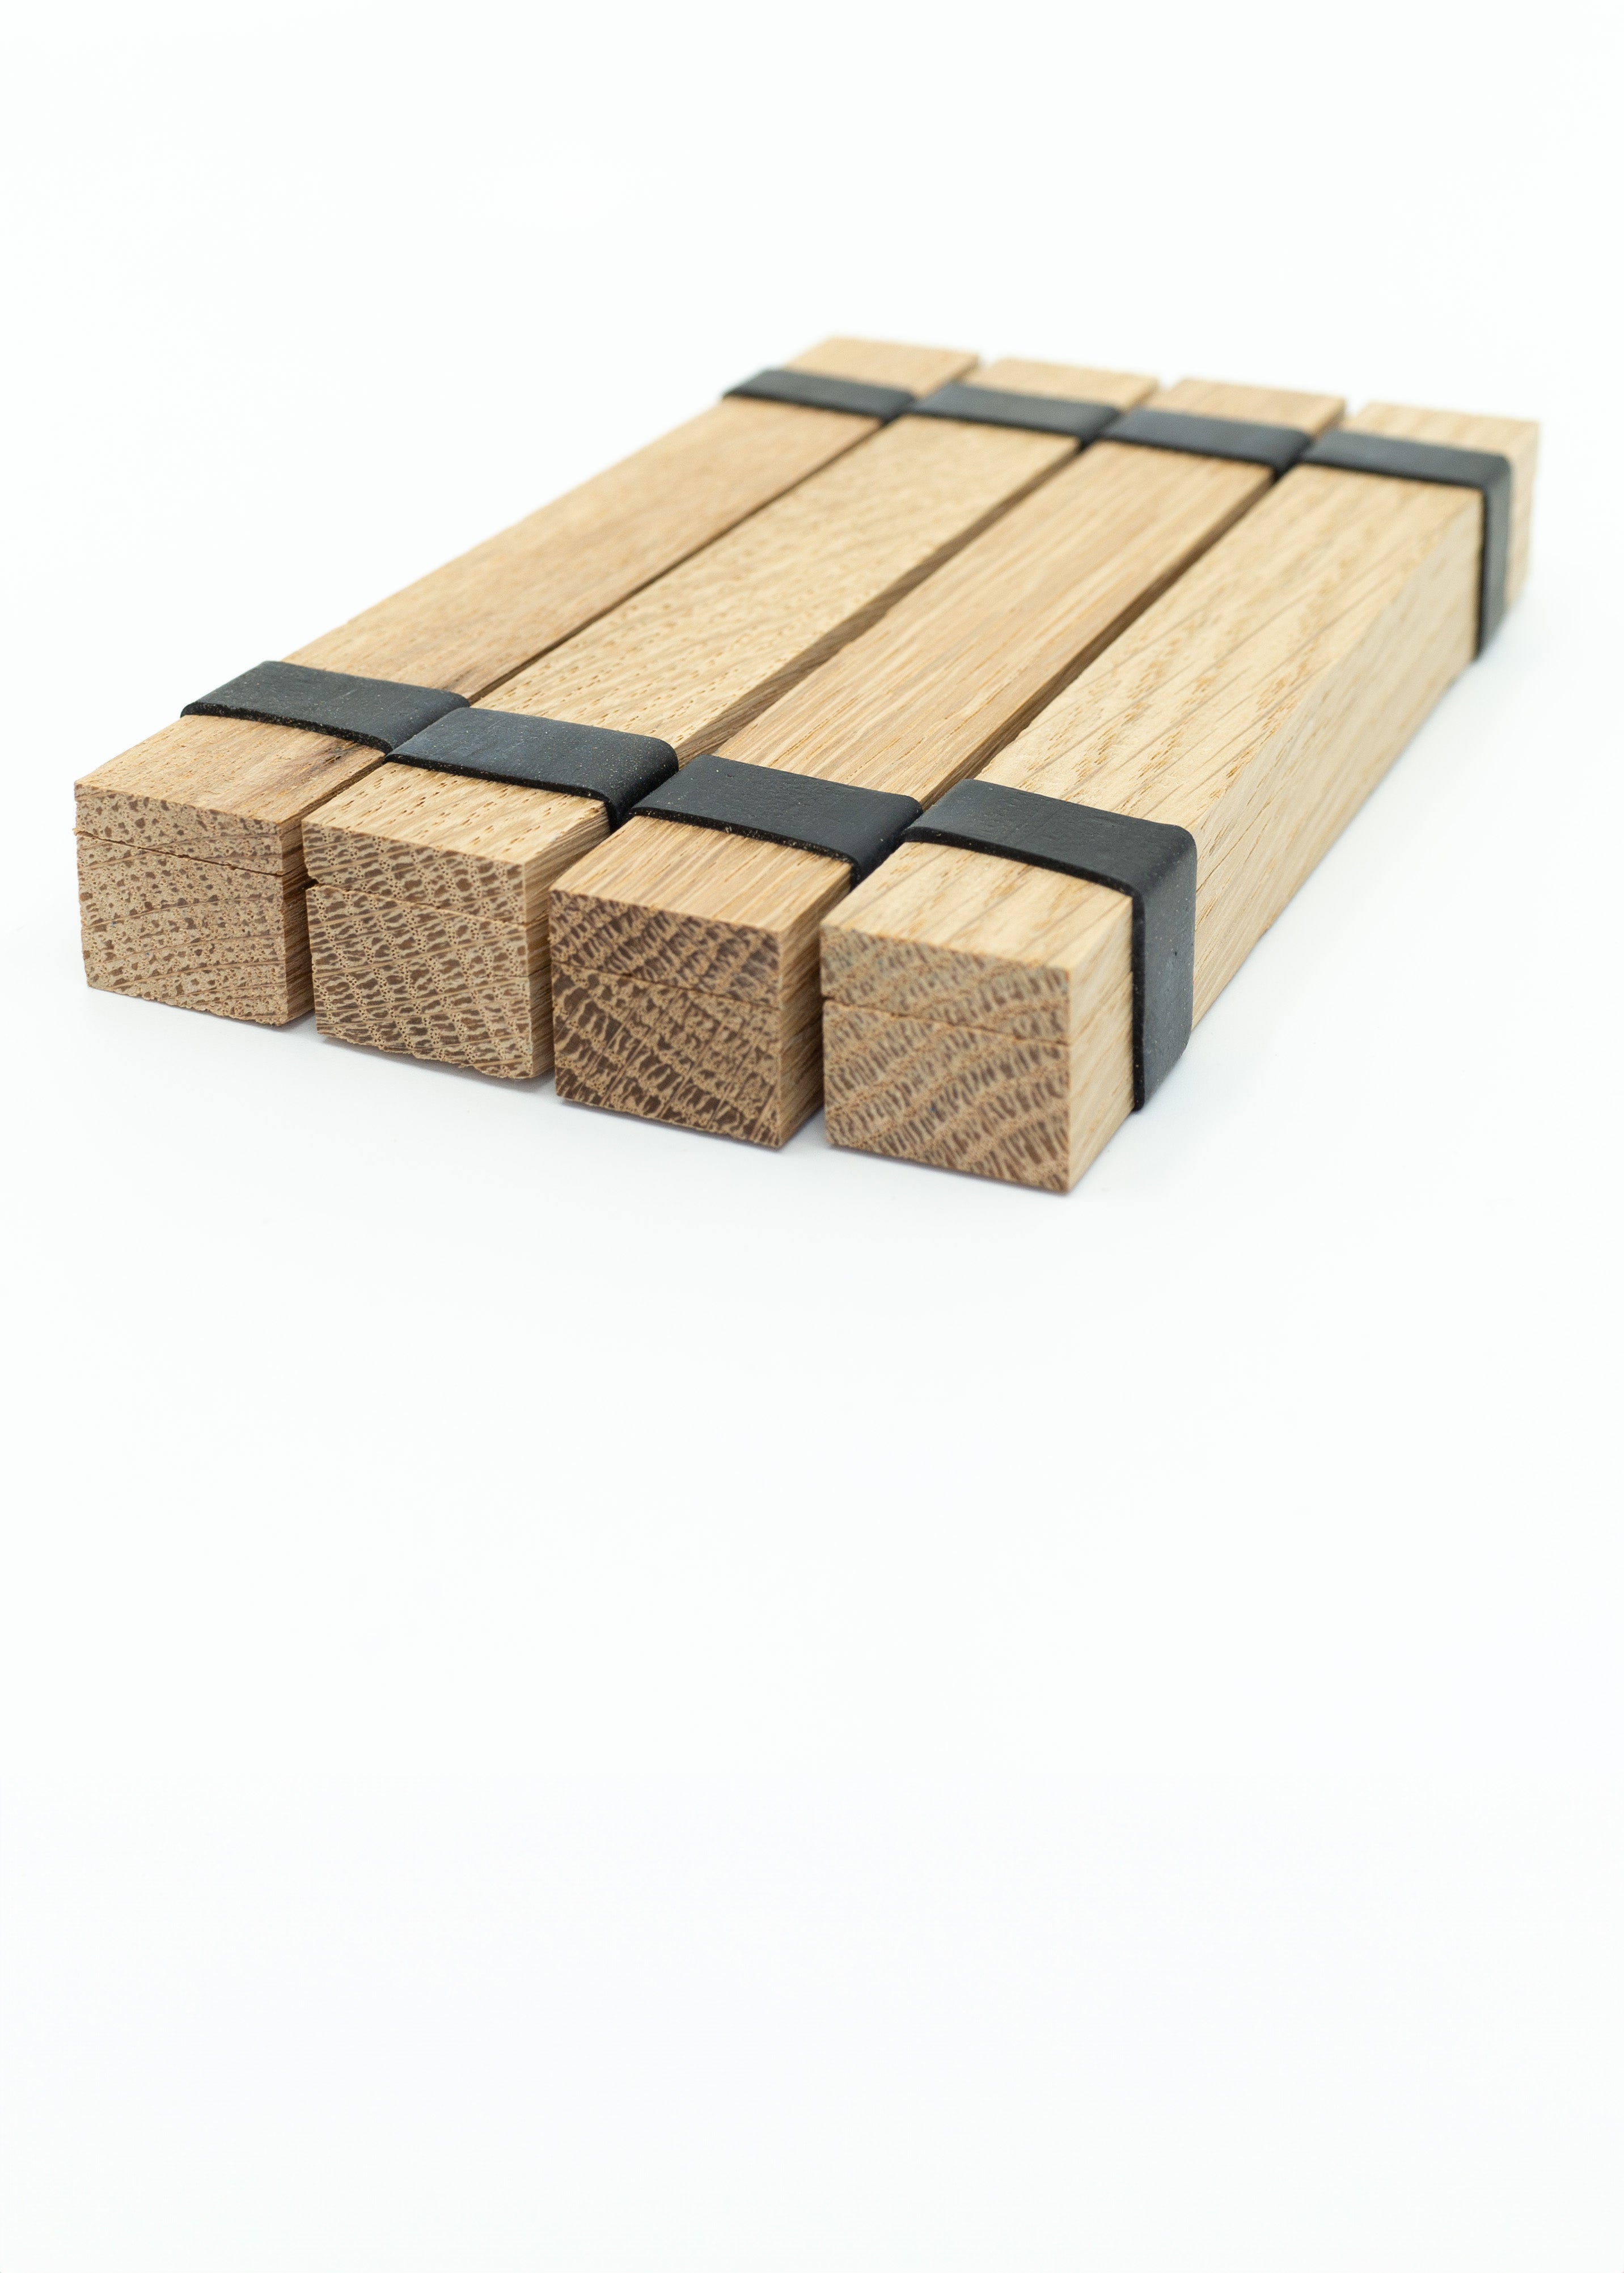 Nesting blocks shown from the rear to demonstrate that they do not have rear entries.